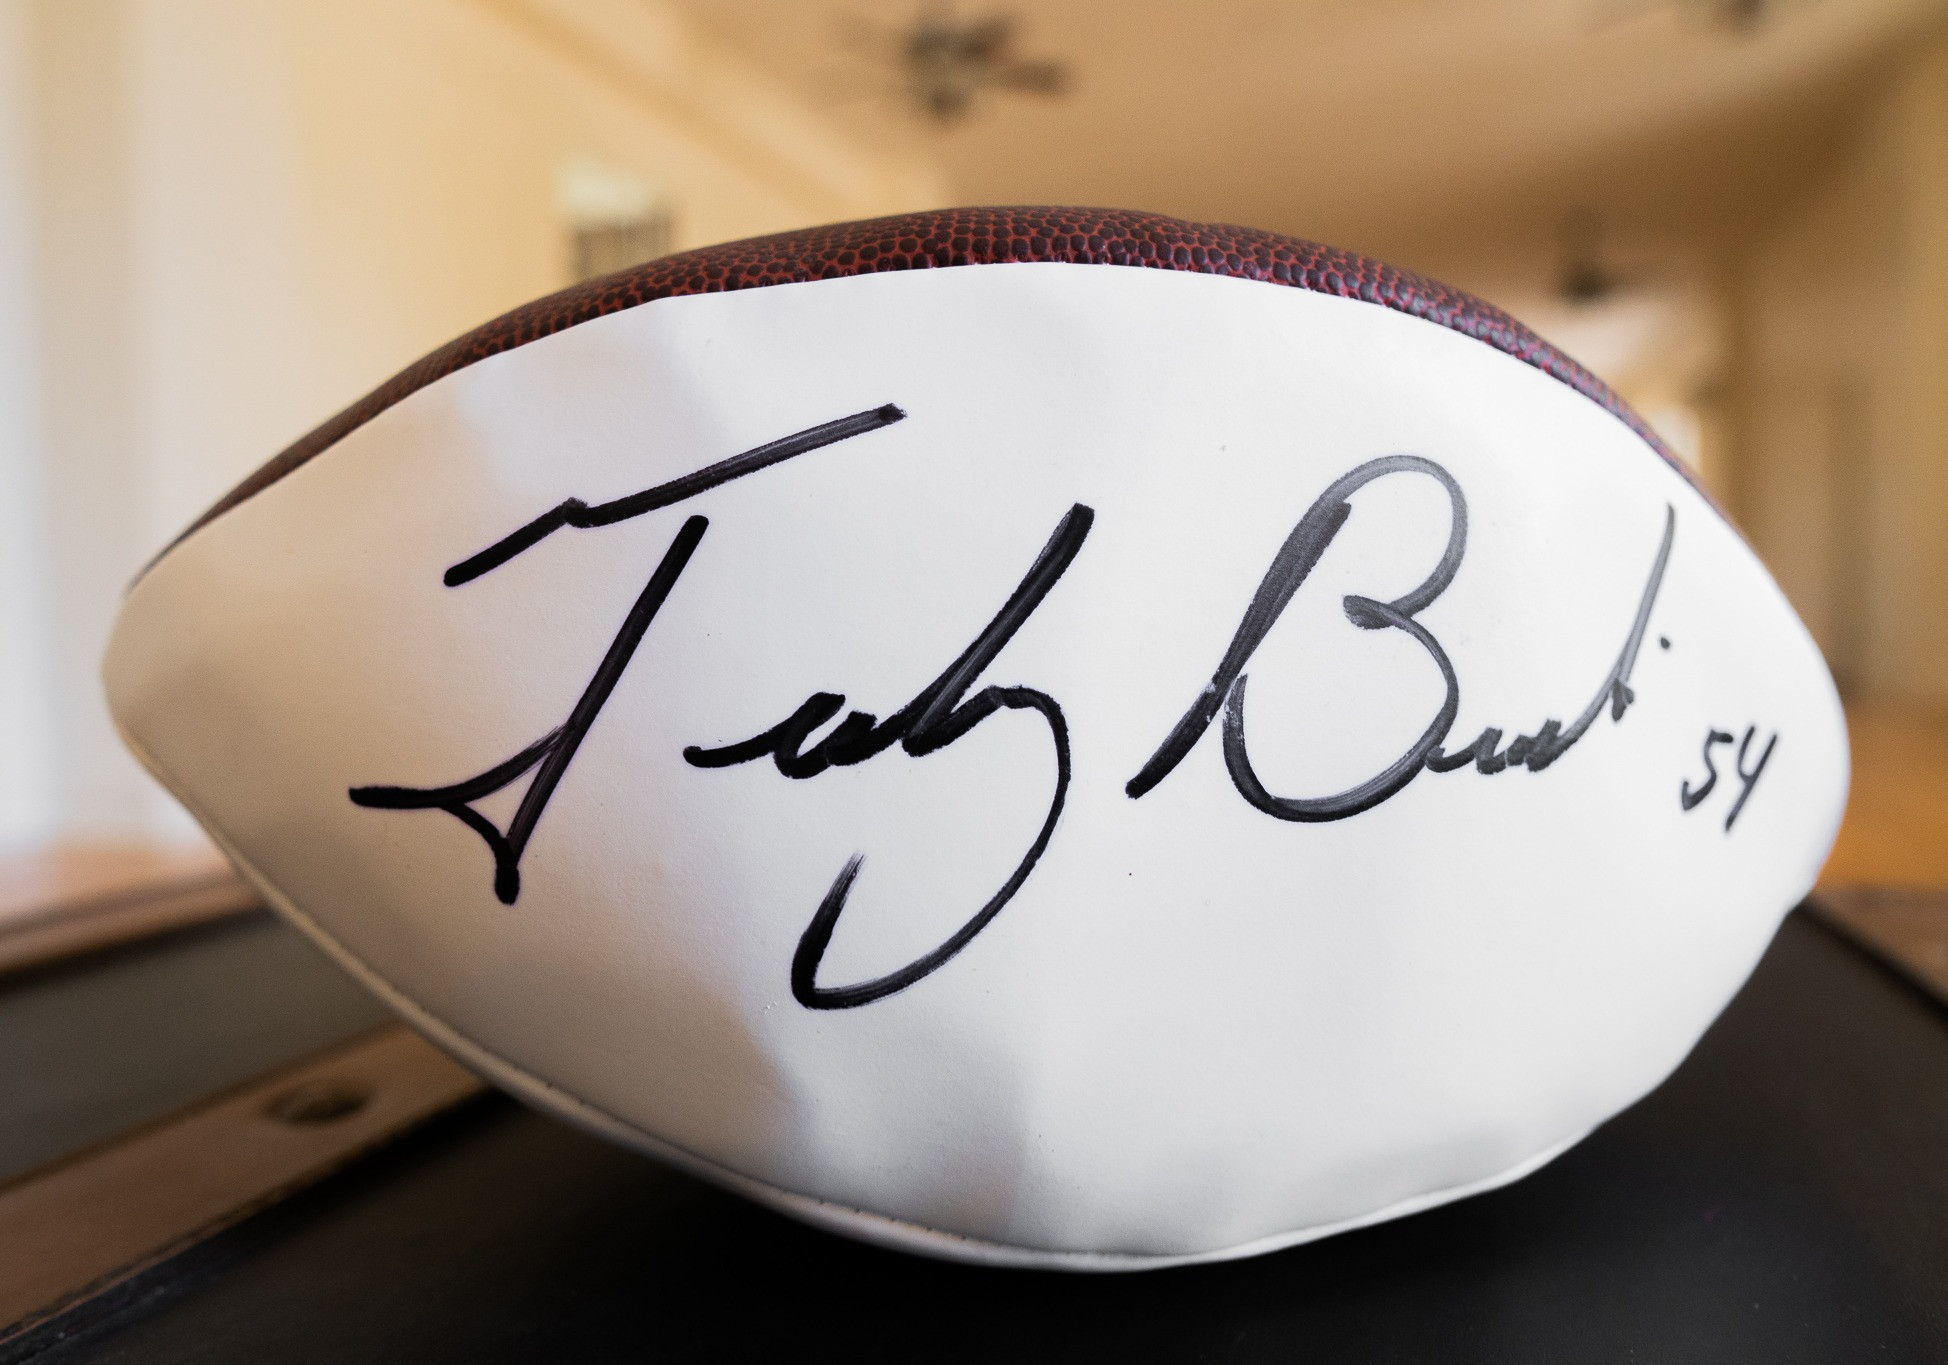 The Duke Wilson NFL Football autographed by three time Super Bowl Champ Tedy Bruschi.